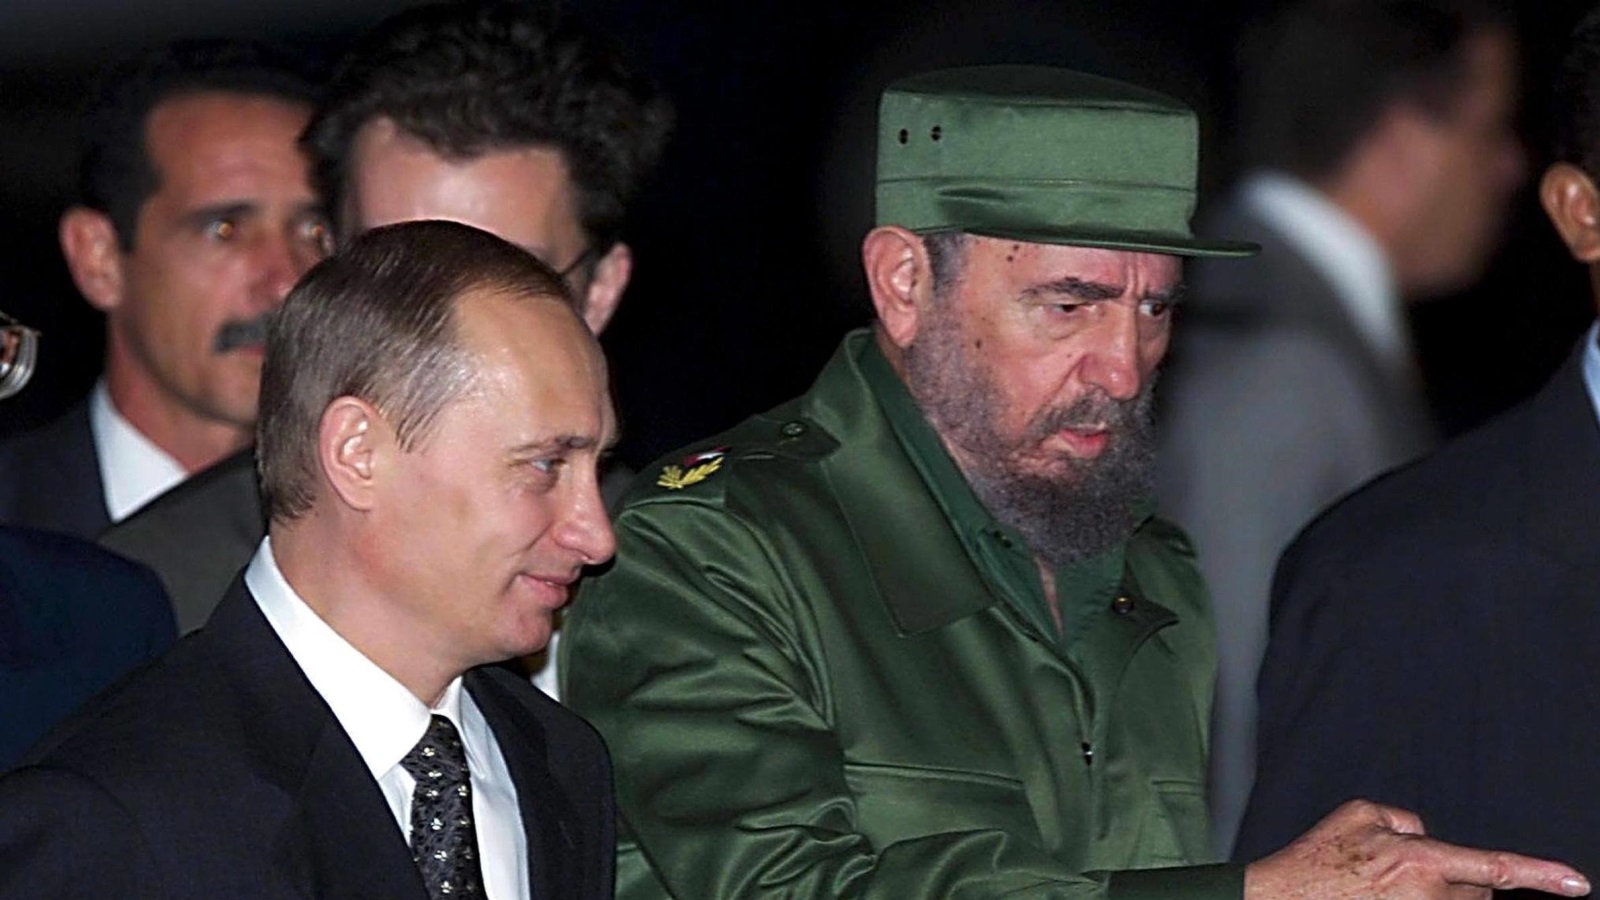 (FILE) A file picture dated 13 December 2000 shows Cuban President Fidel Castro (R) welcoming Russian President Vladimir Putin at Jose Marti Airport in Havana, Cuba. According to a Cuban state TV broadcast, Cuban former President Fidel Castro has died at the age of 90 on 25 November 2016.